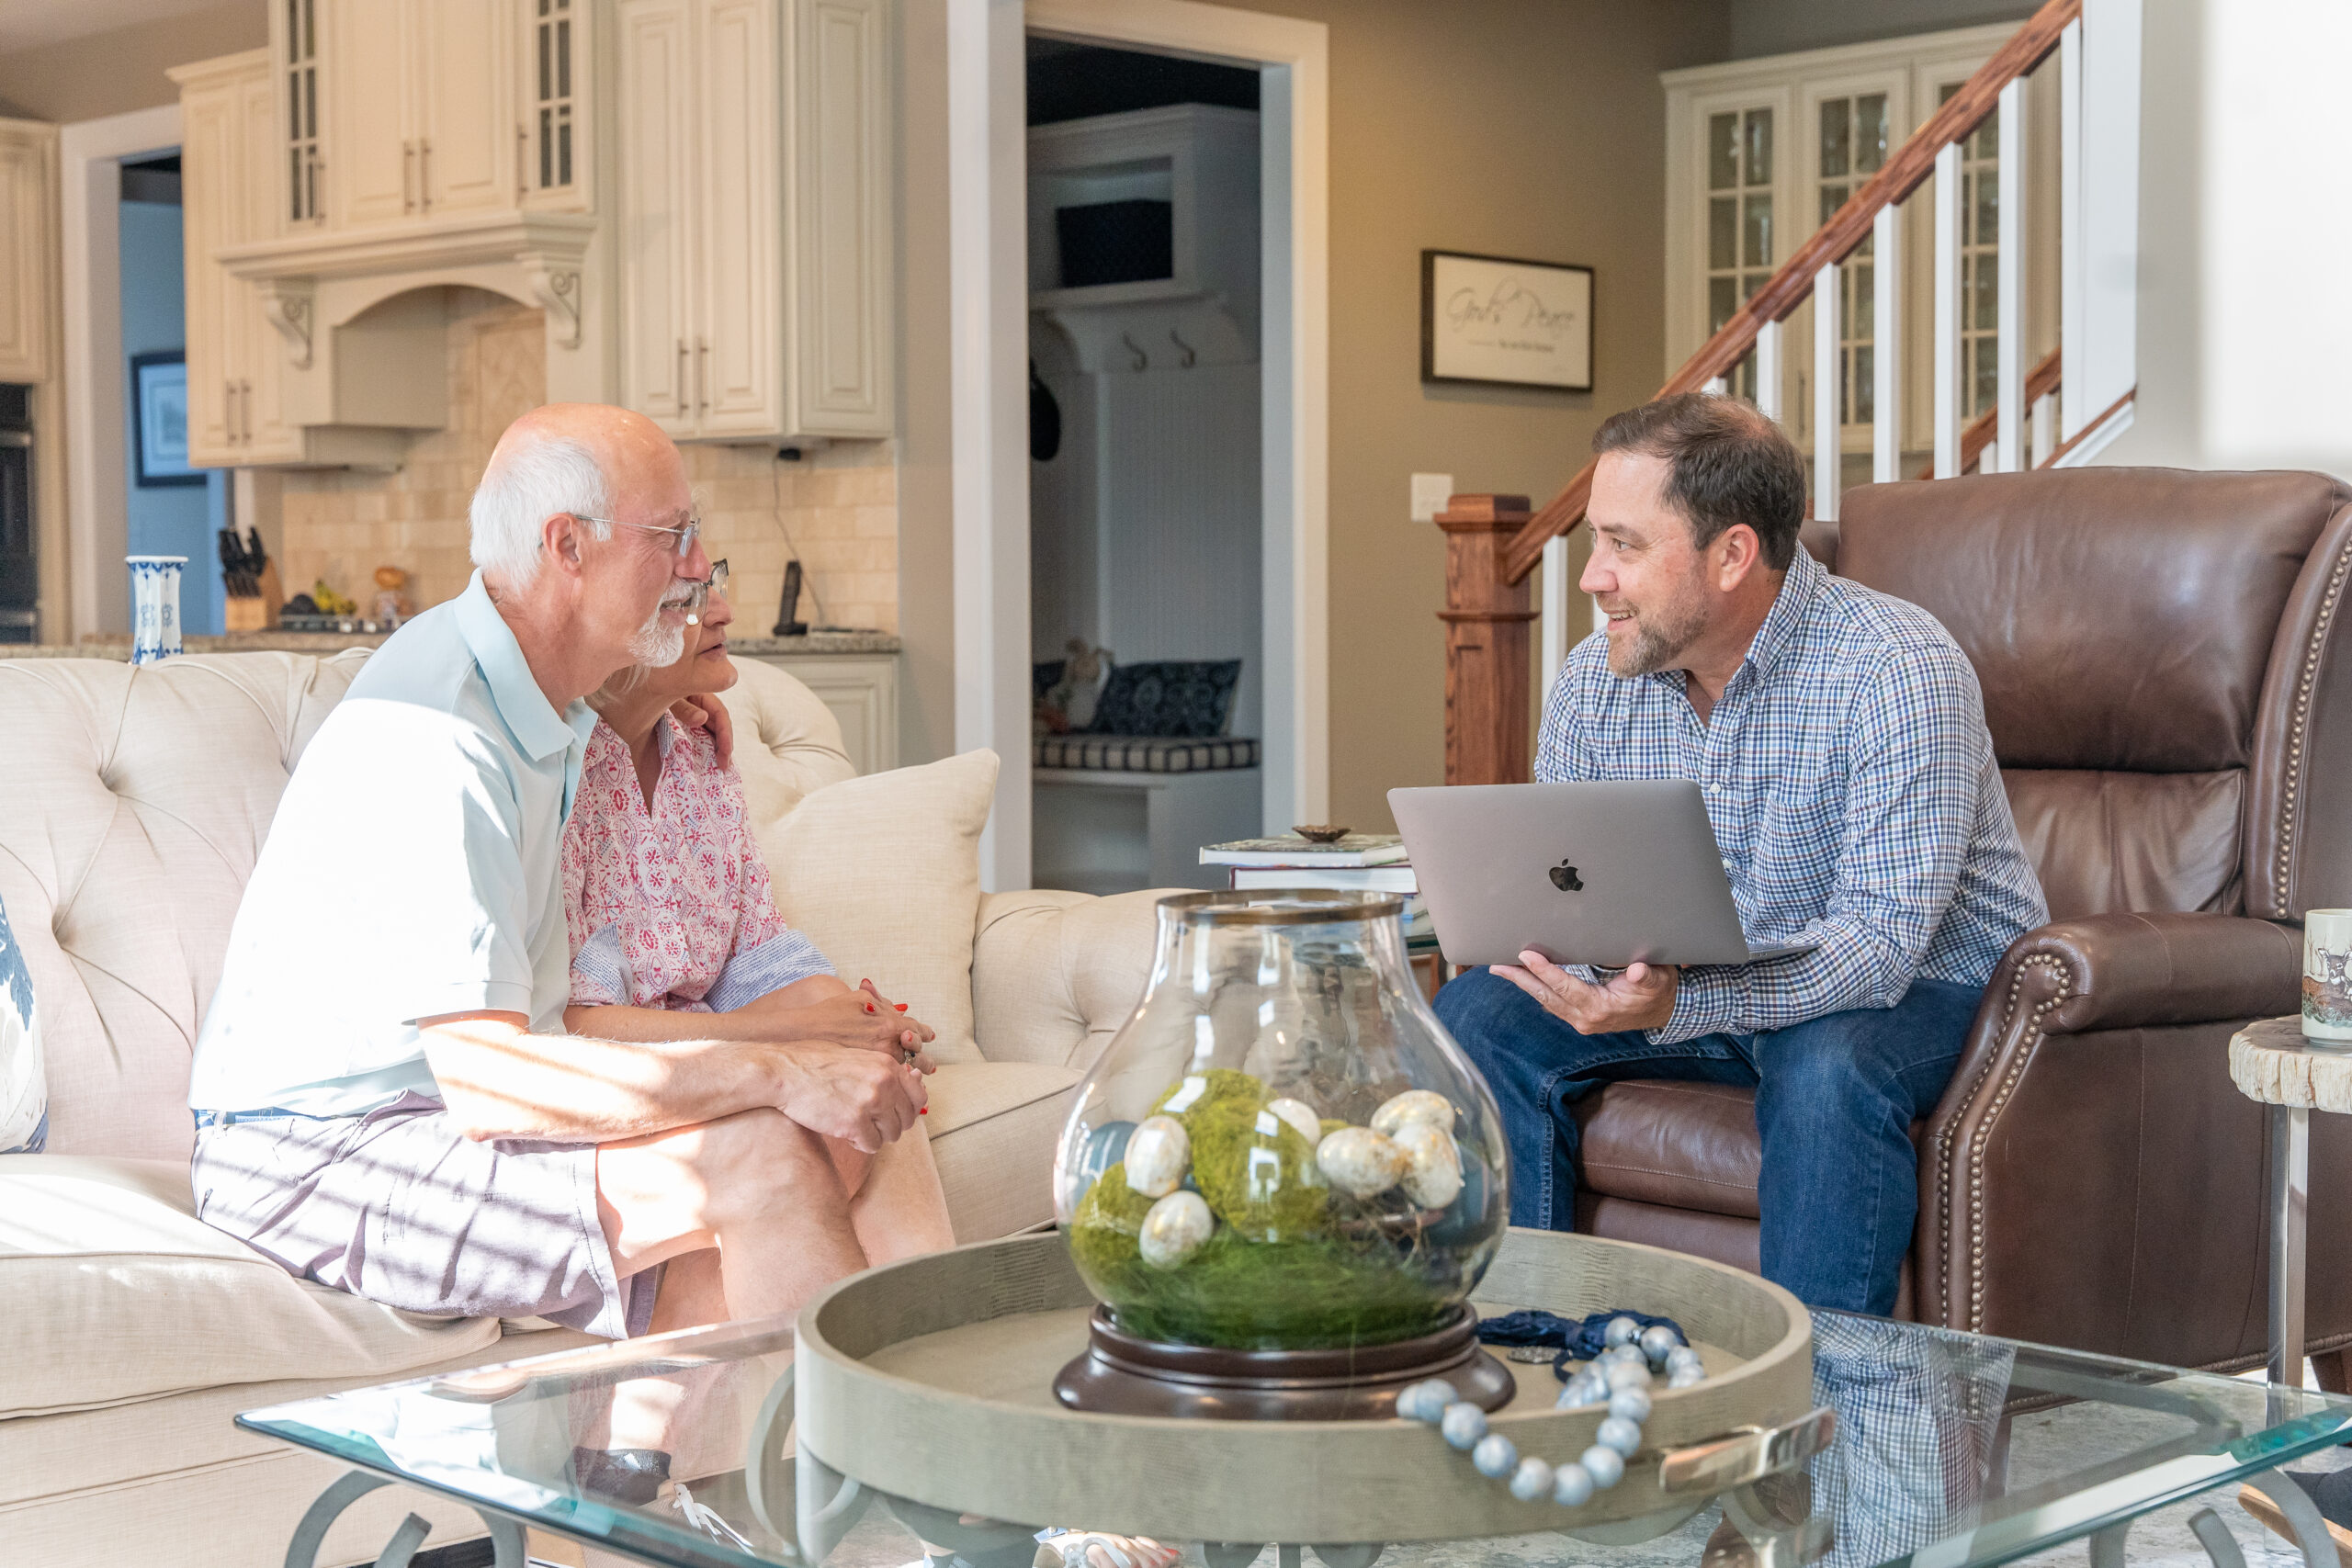 personal branding photo for realtors showing a smiling male realtor with his MacBook laptop sitting in the living room with 2 elderly clients